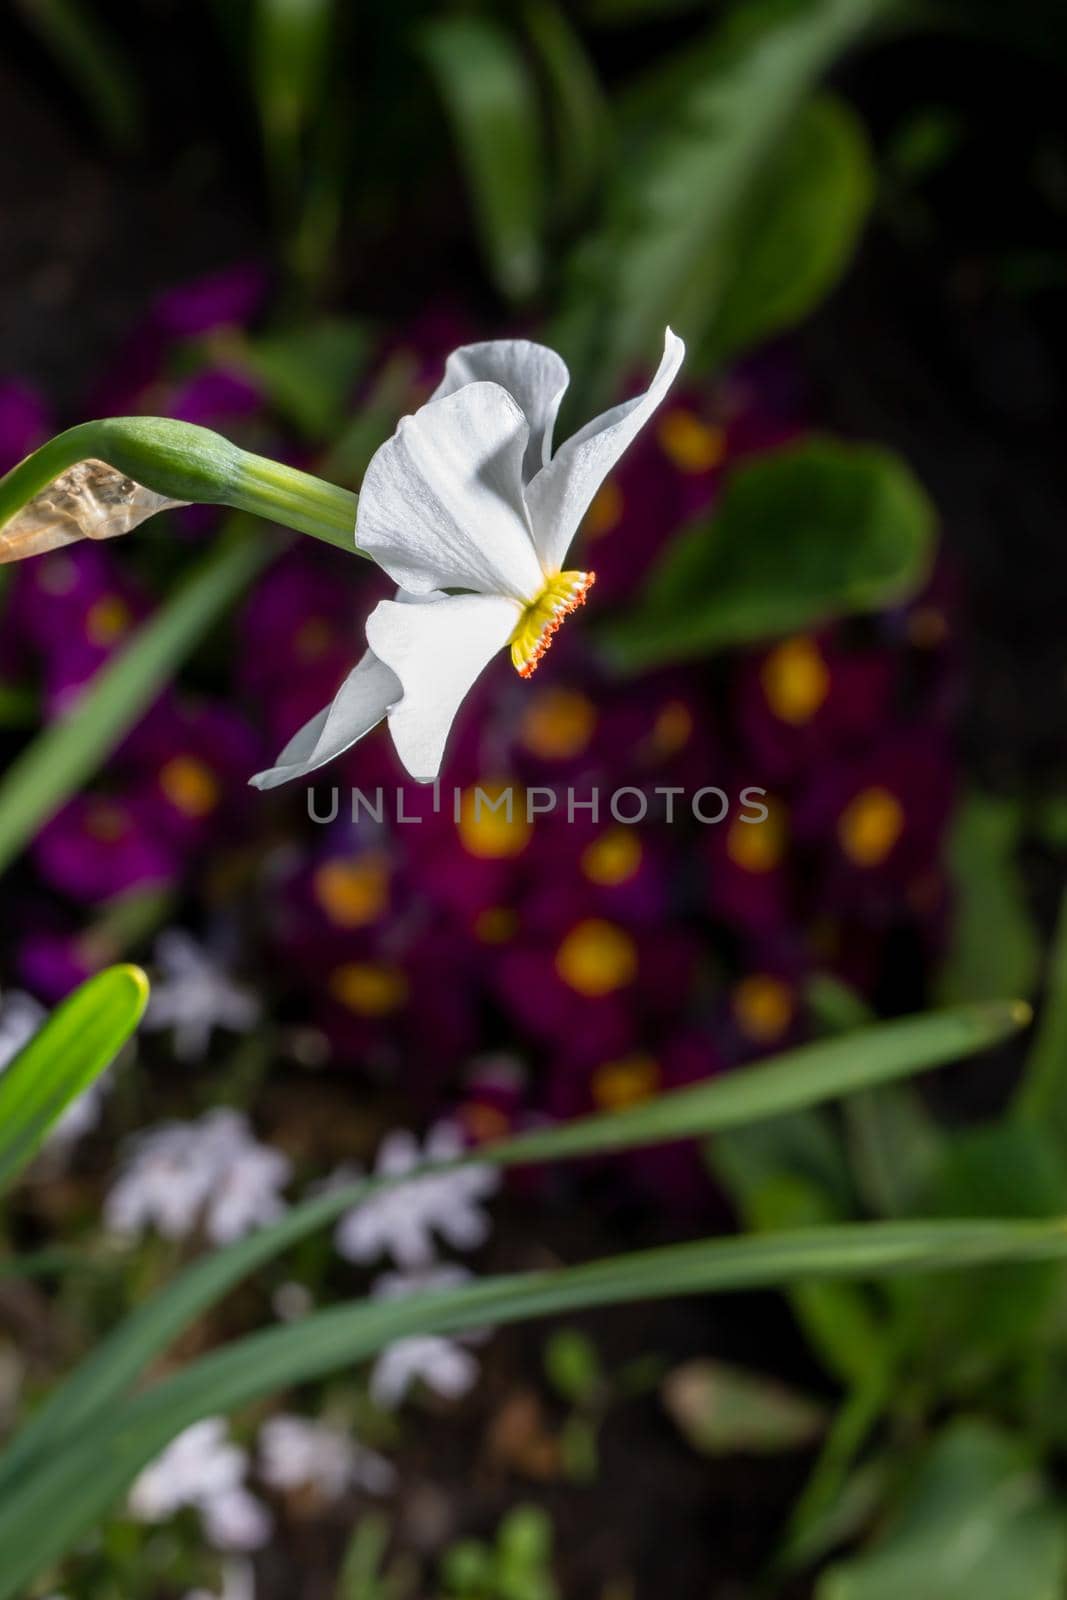 Celebration of life, white narcissus in spring over blurred nature background by clusterx